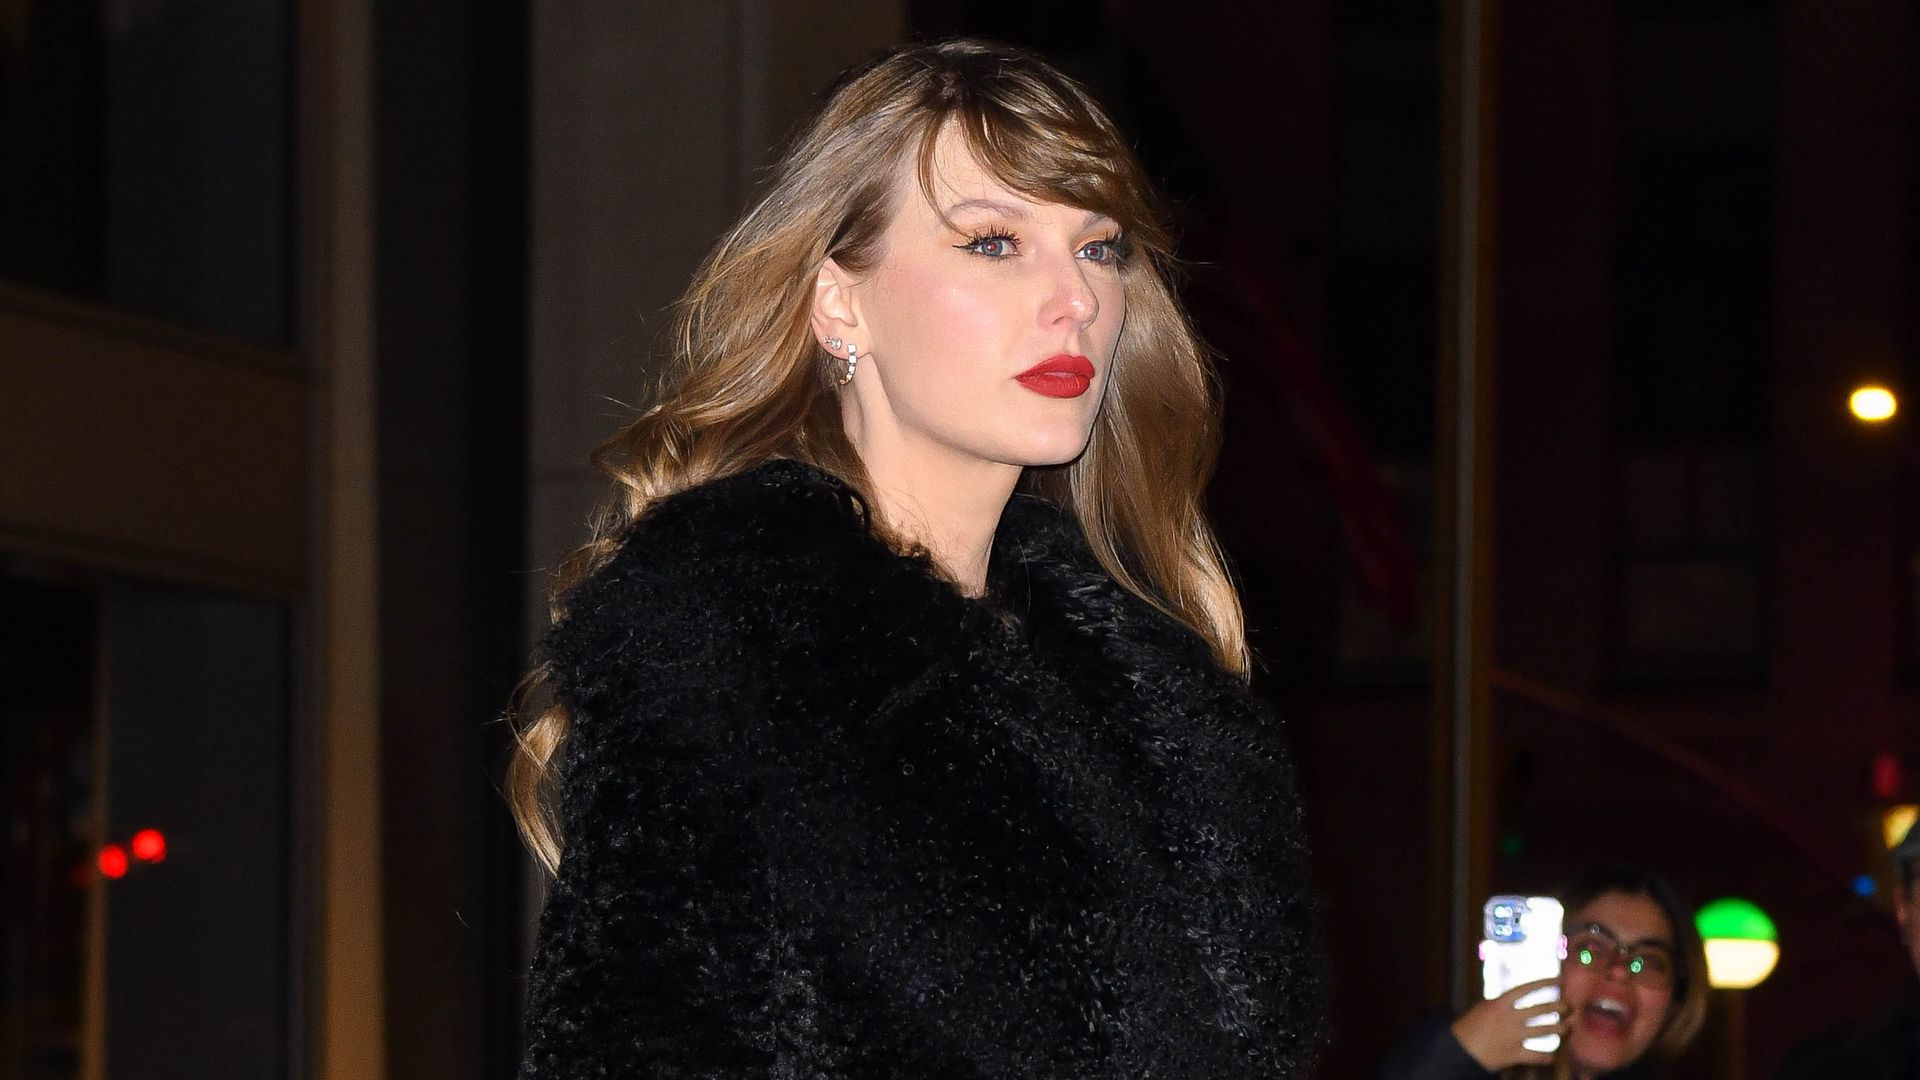 Taylor Swift's Style: The Singer's Best Fall Looks And Fashion Moments